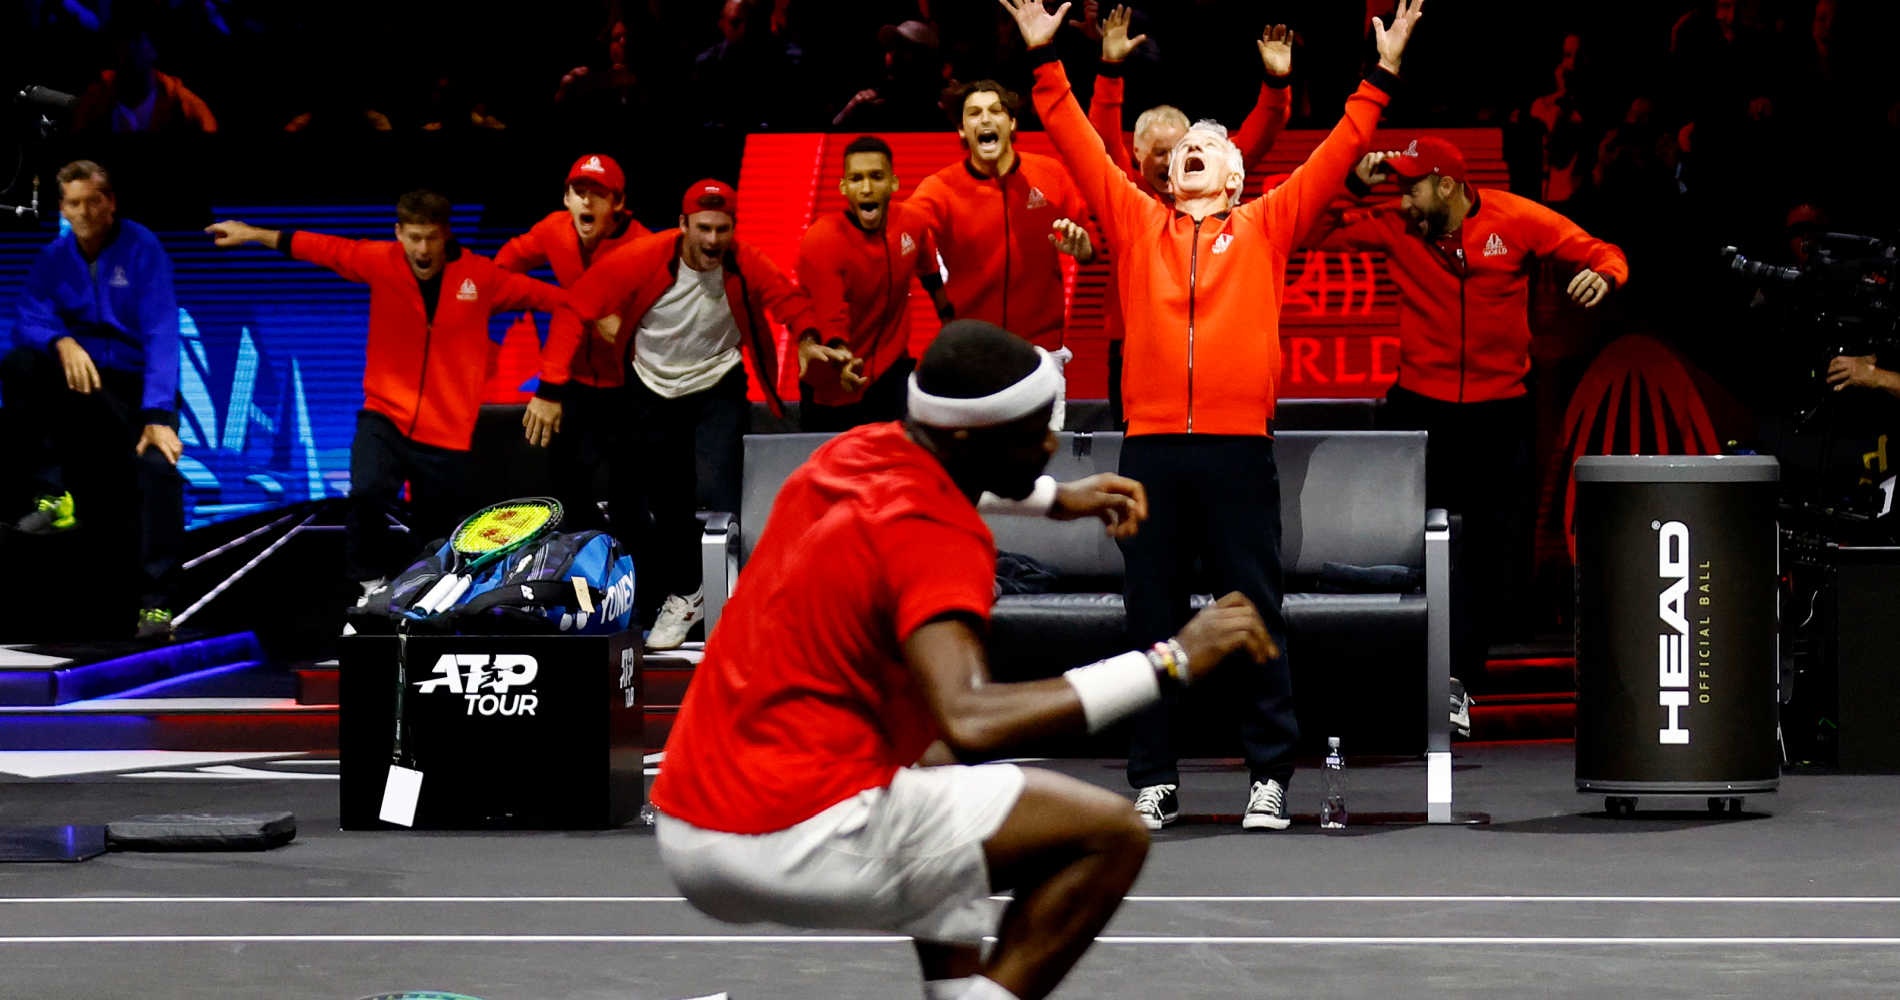 
Team World's Frances Tiafoe celebrates after winning his match and the Laver Cup against Team Europe's Stefanos Tsitsipas | © AI / Reuters / Panoramic